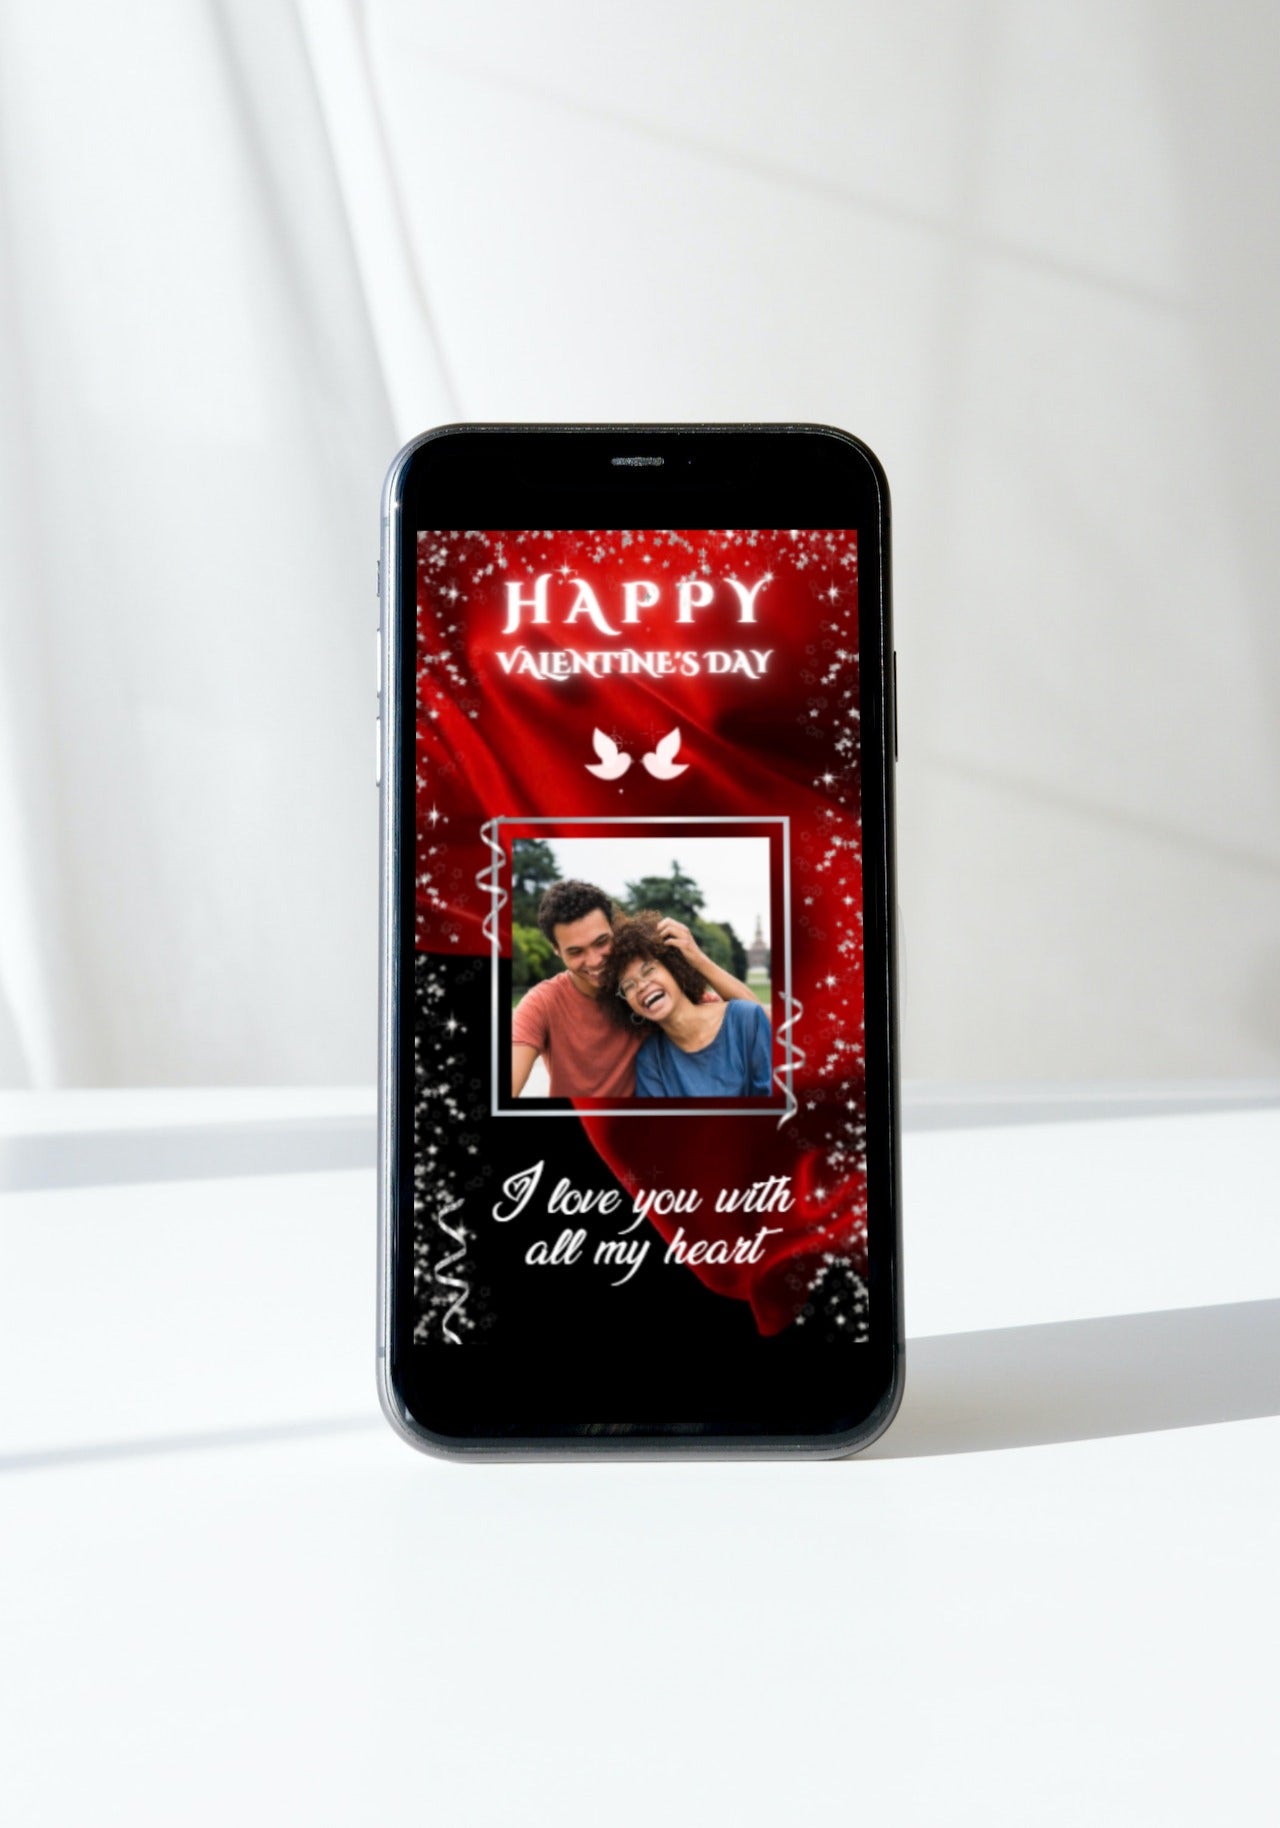 Smartphone displaying a customizable Valentine's ecard with a red flowing fabric background, featuring a laughing man and woman.